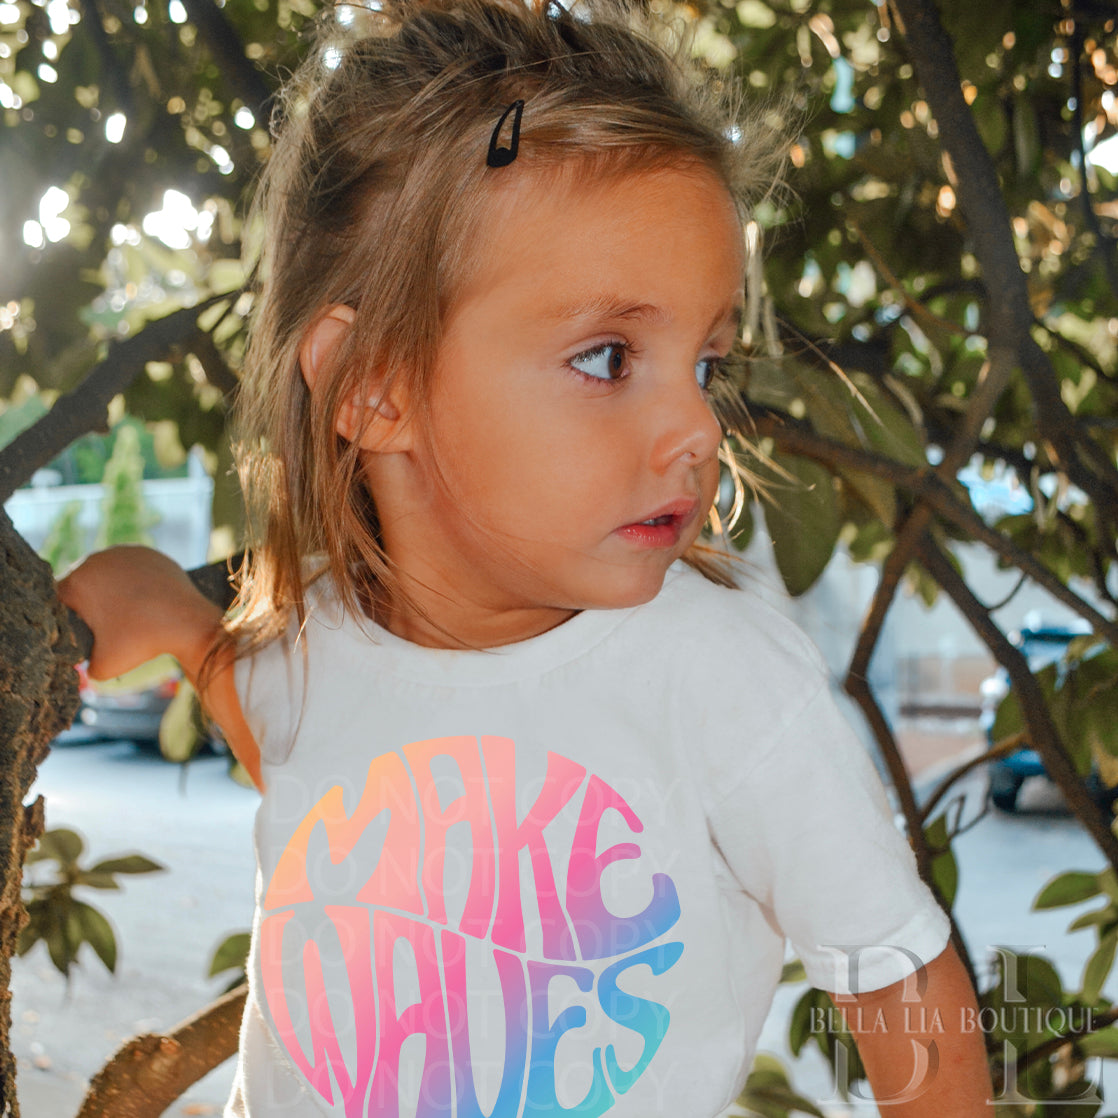 Make Waves Toddler and Youth Tee - Bella Lia Boutique